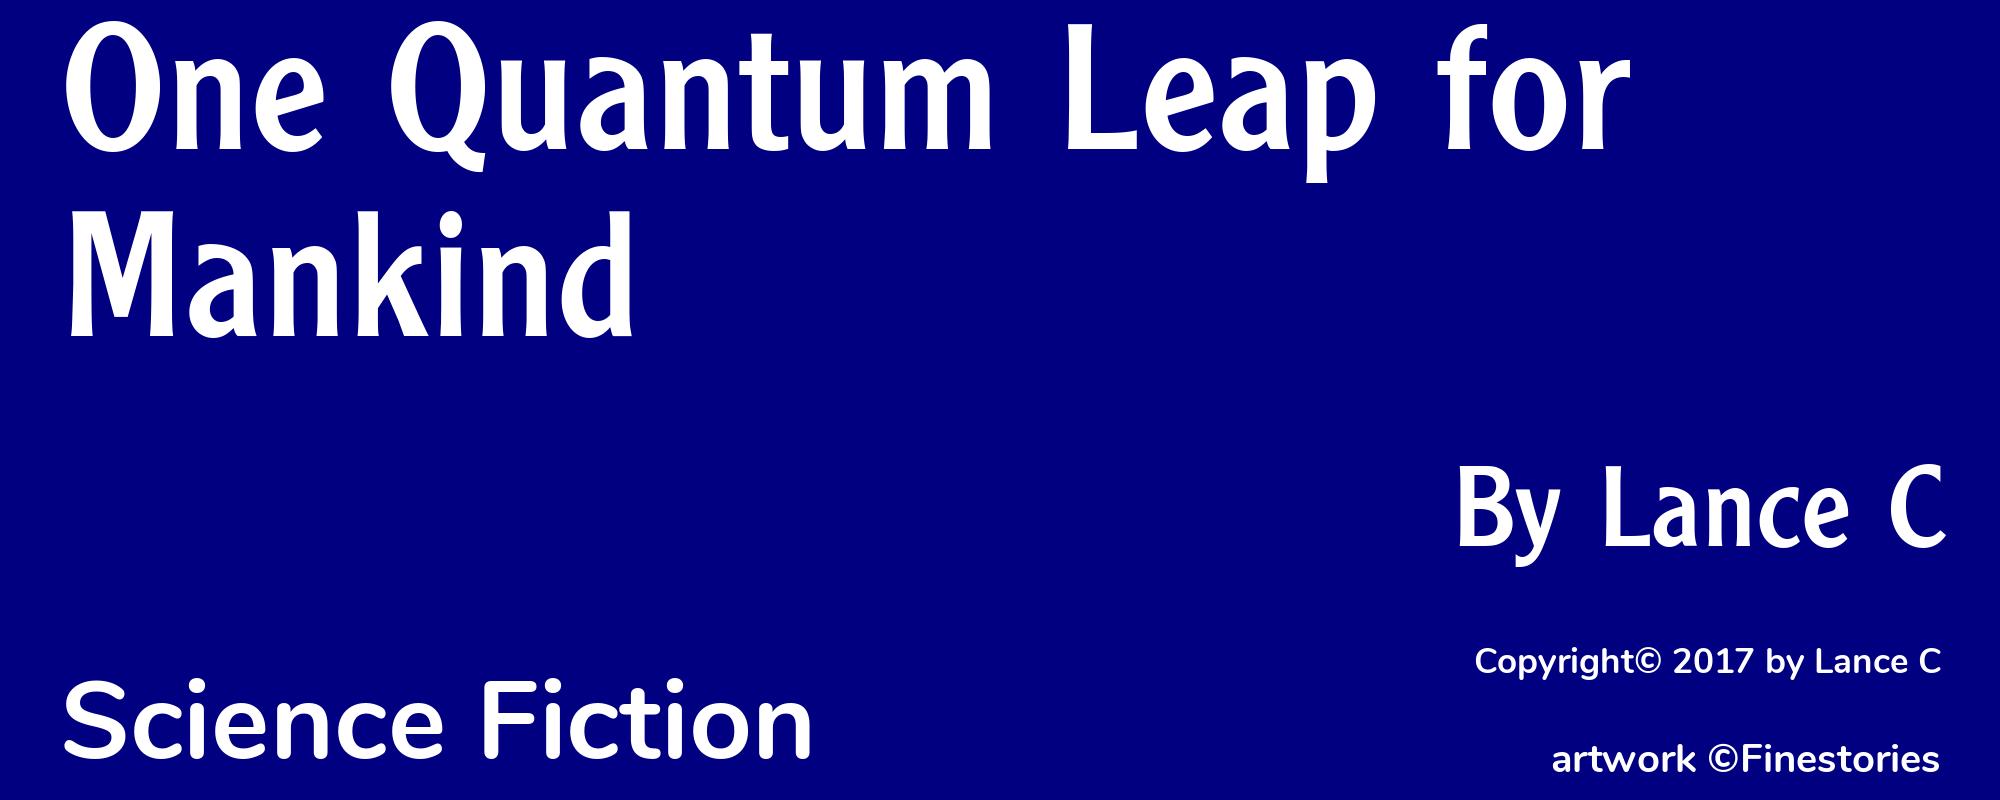 One Quantum Leap for Mankind - Cover